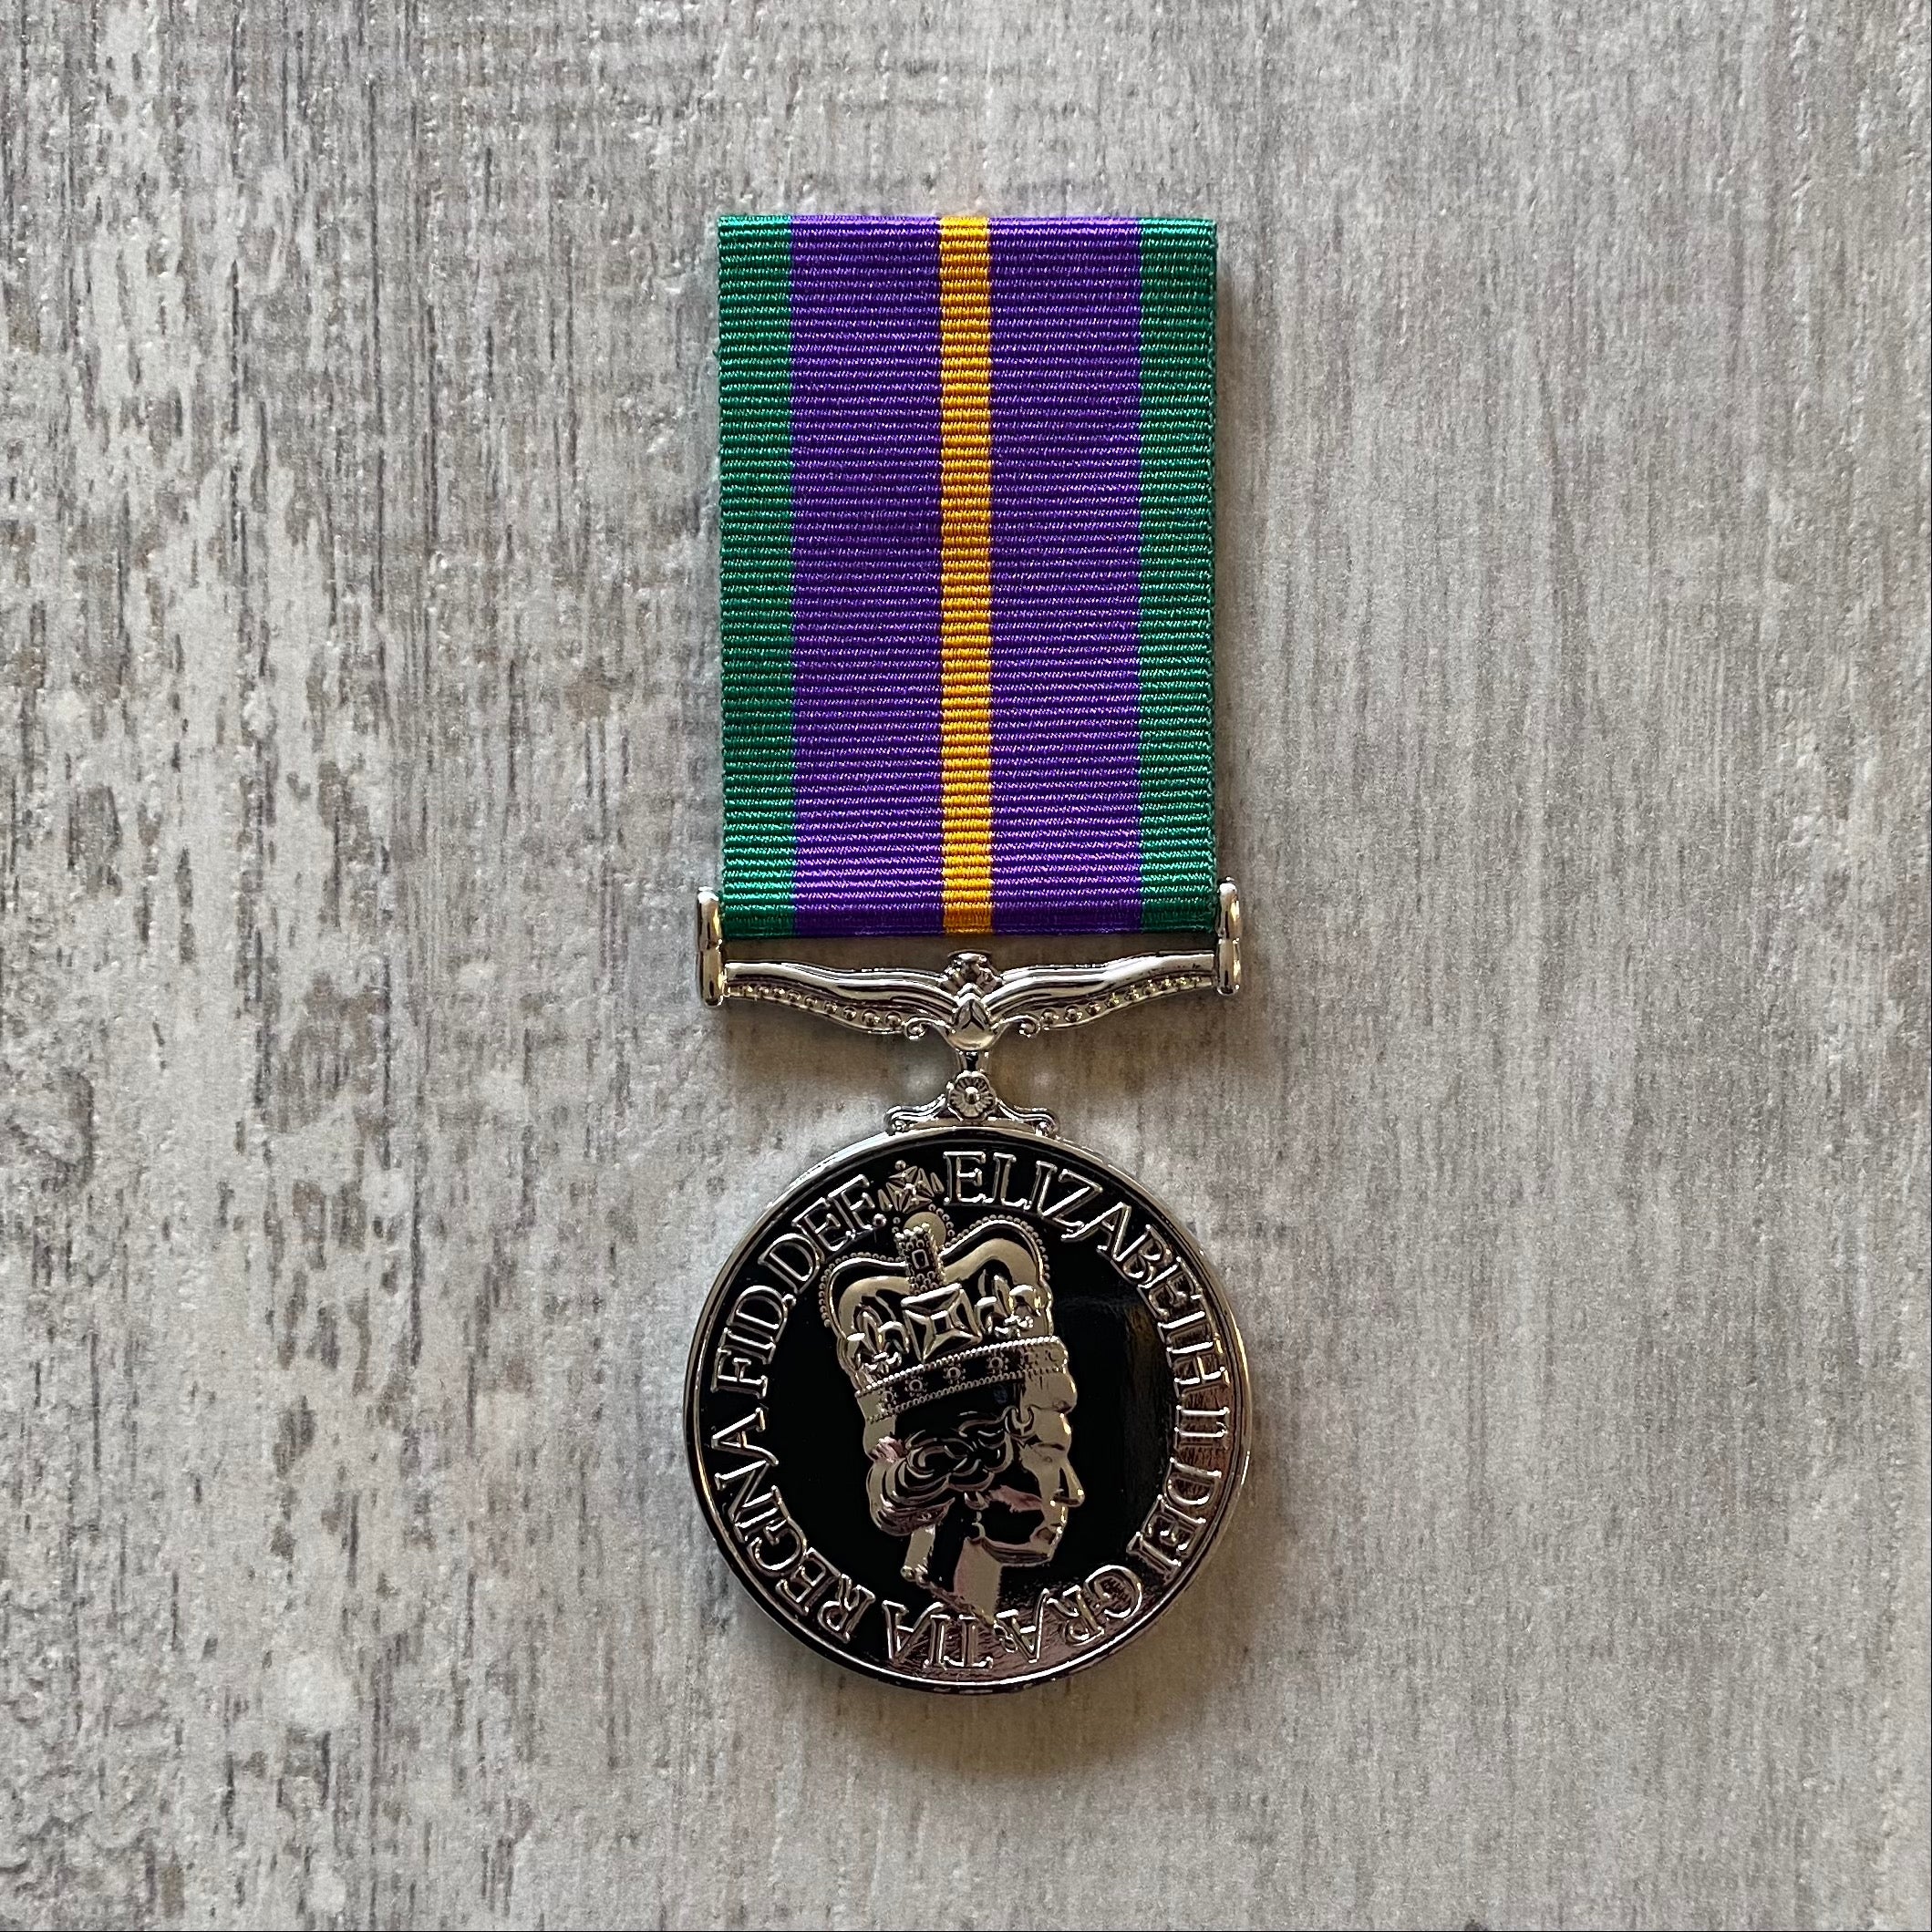 Accumulated Campaign Service Medal - Foxhole Medals